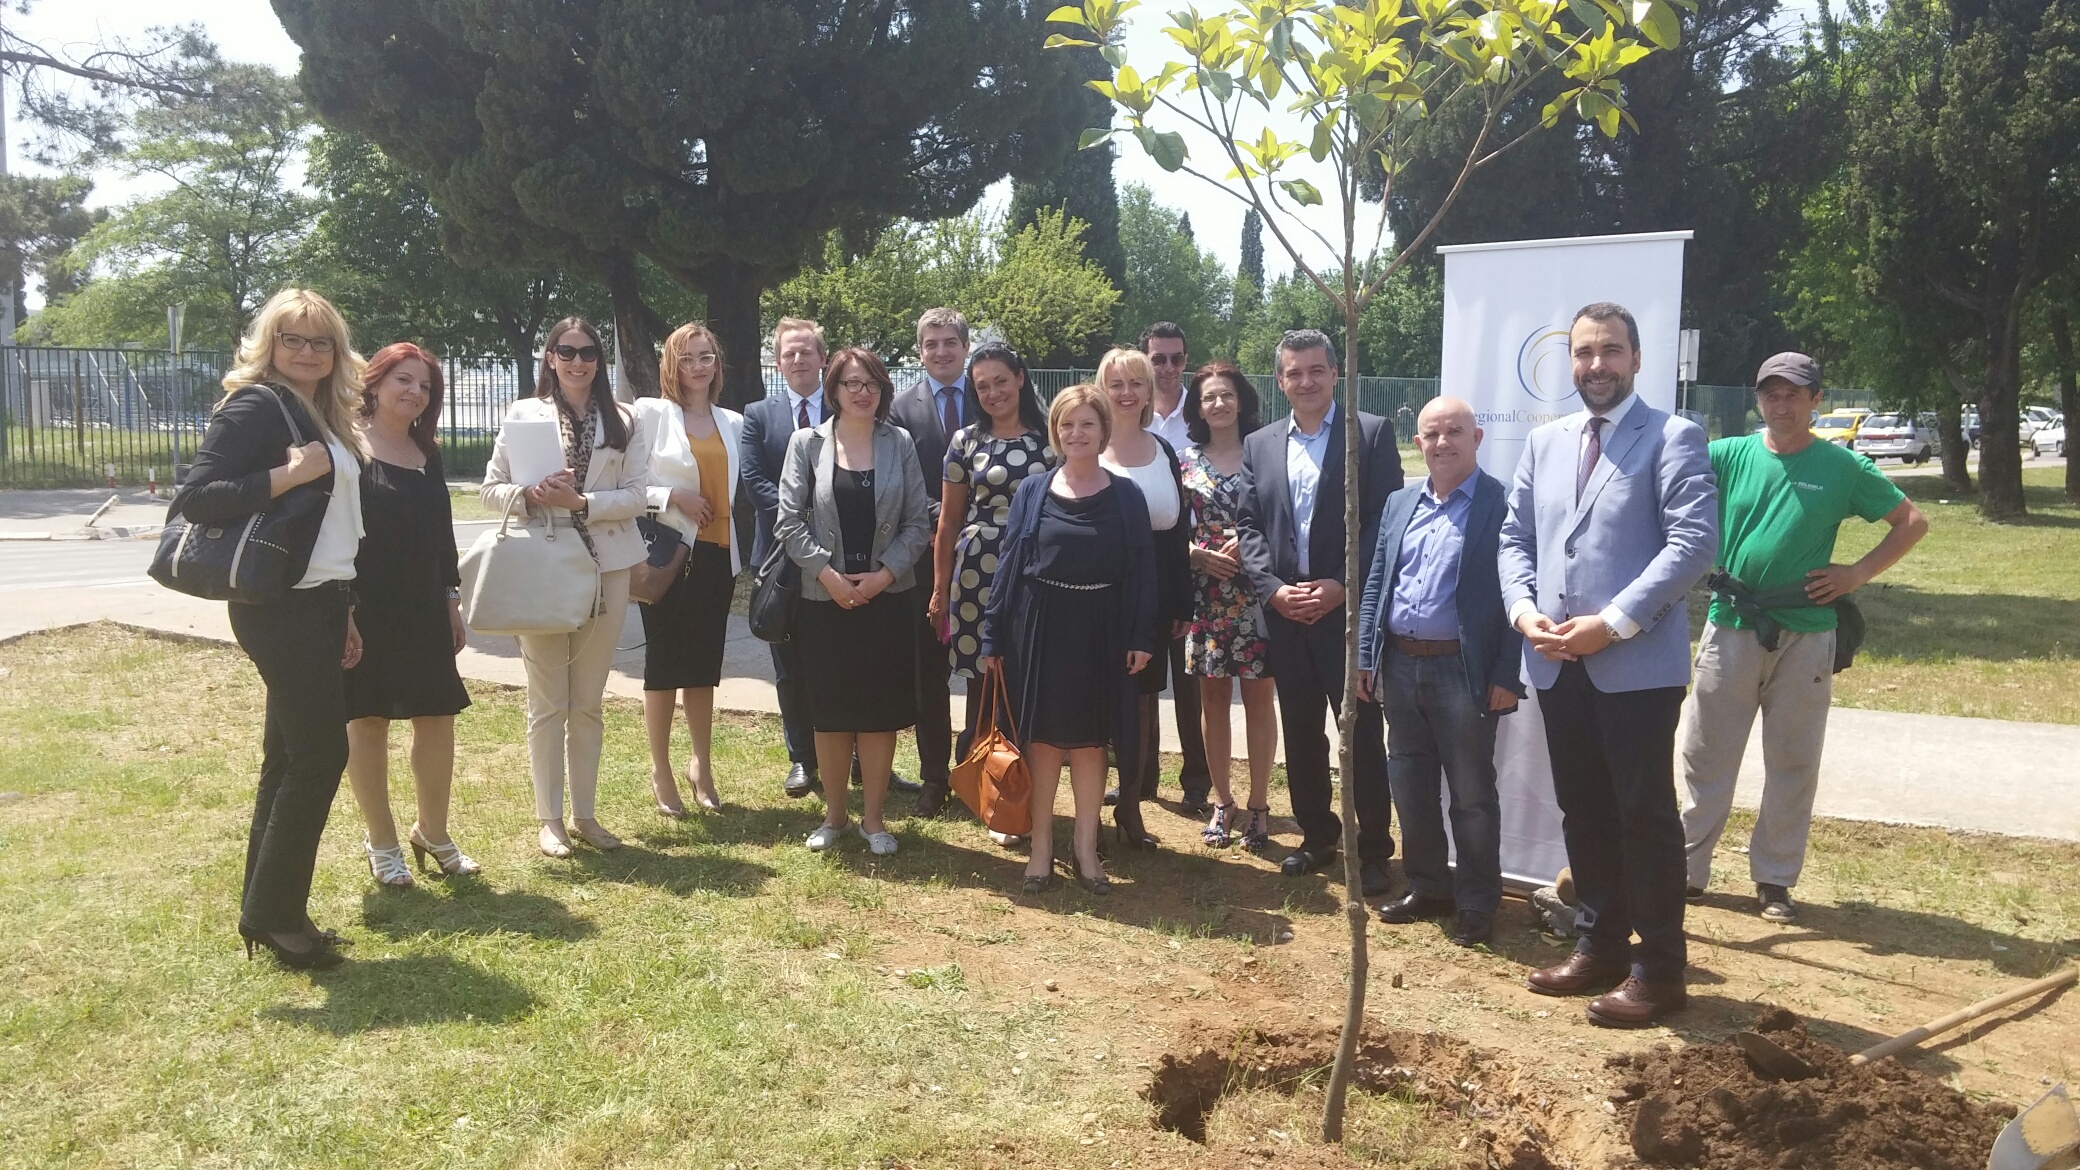 Establishing Regional Working Group on Environment ended with a memorable tree-planting ceremony. Podgorica, 18 May 2015. (Photo: RCC/Srdjan Susic)